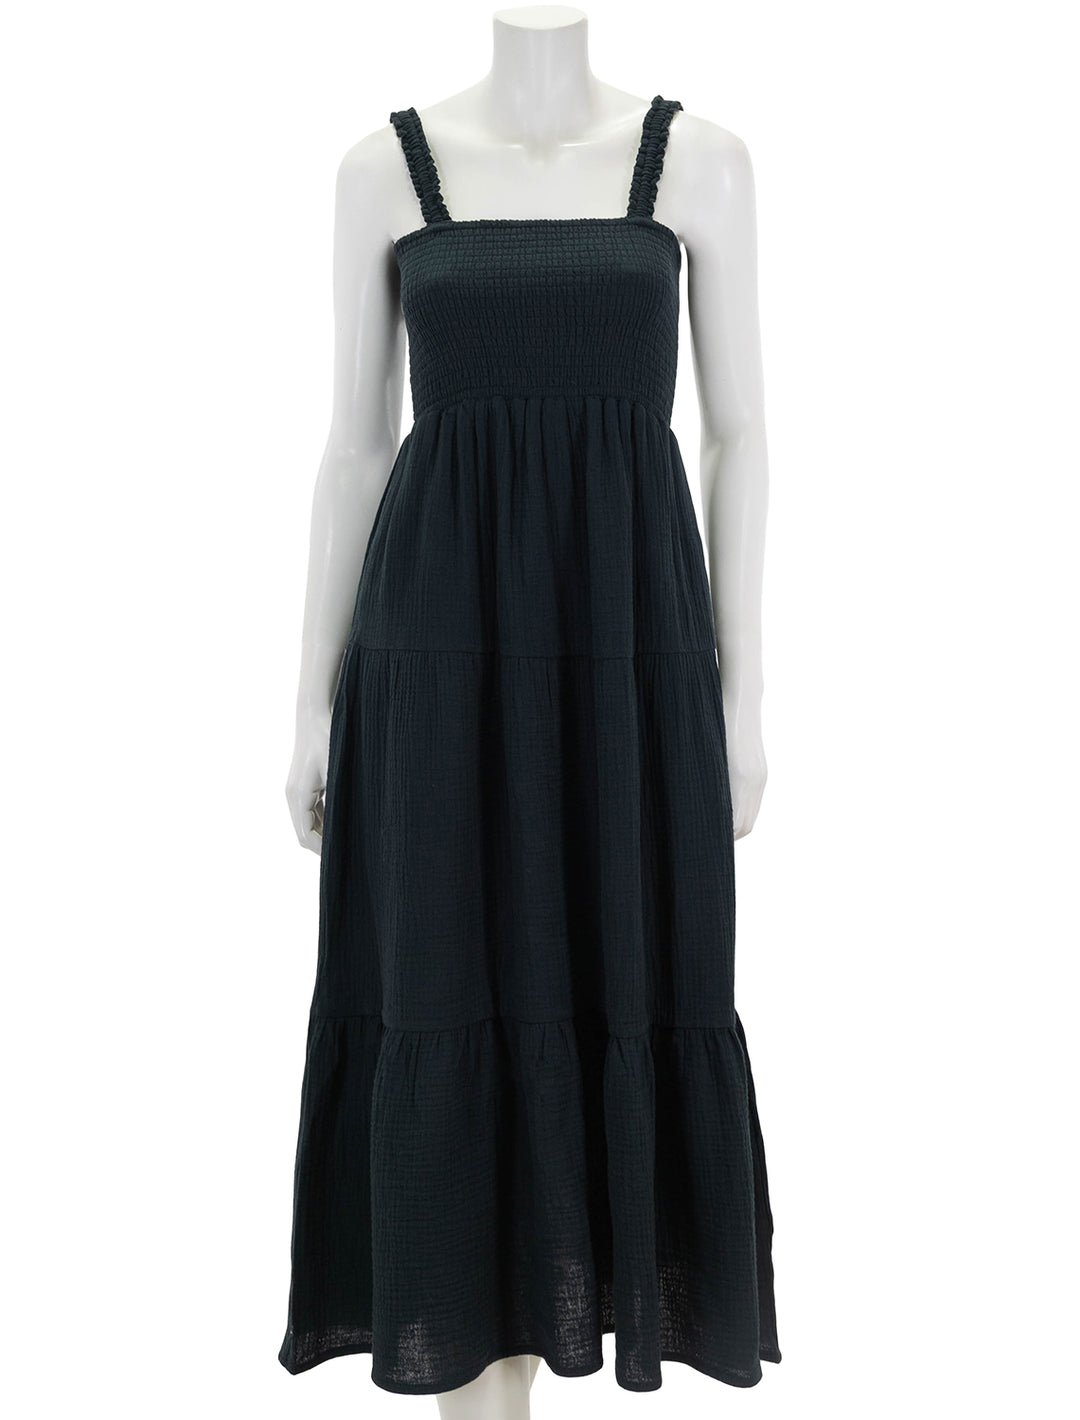 Front view of Marine Layer's selene maxi dress in black.